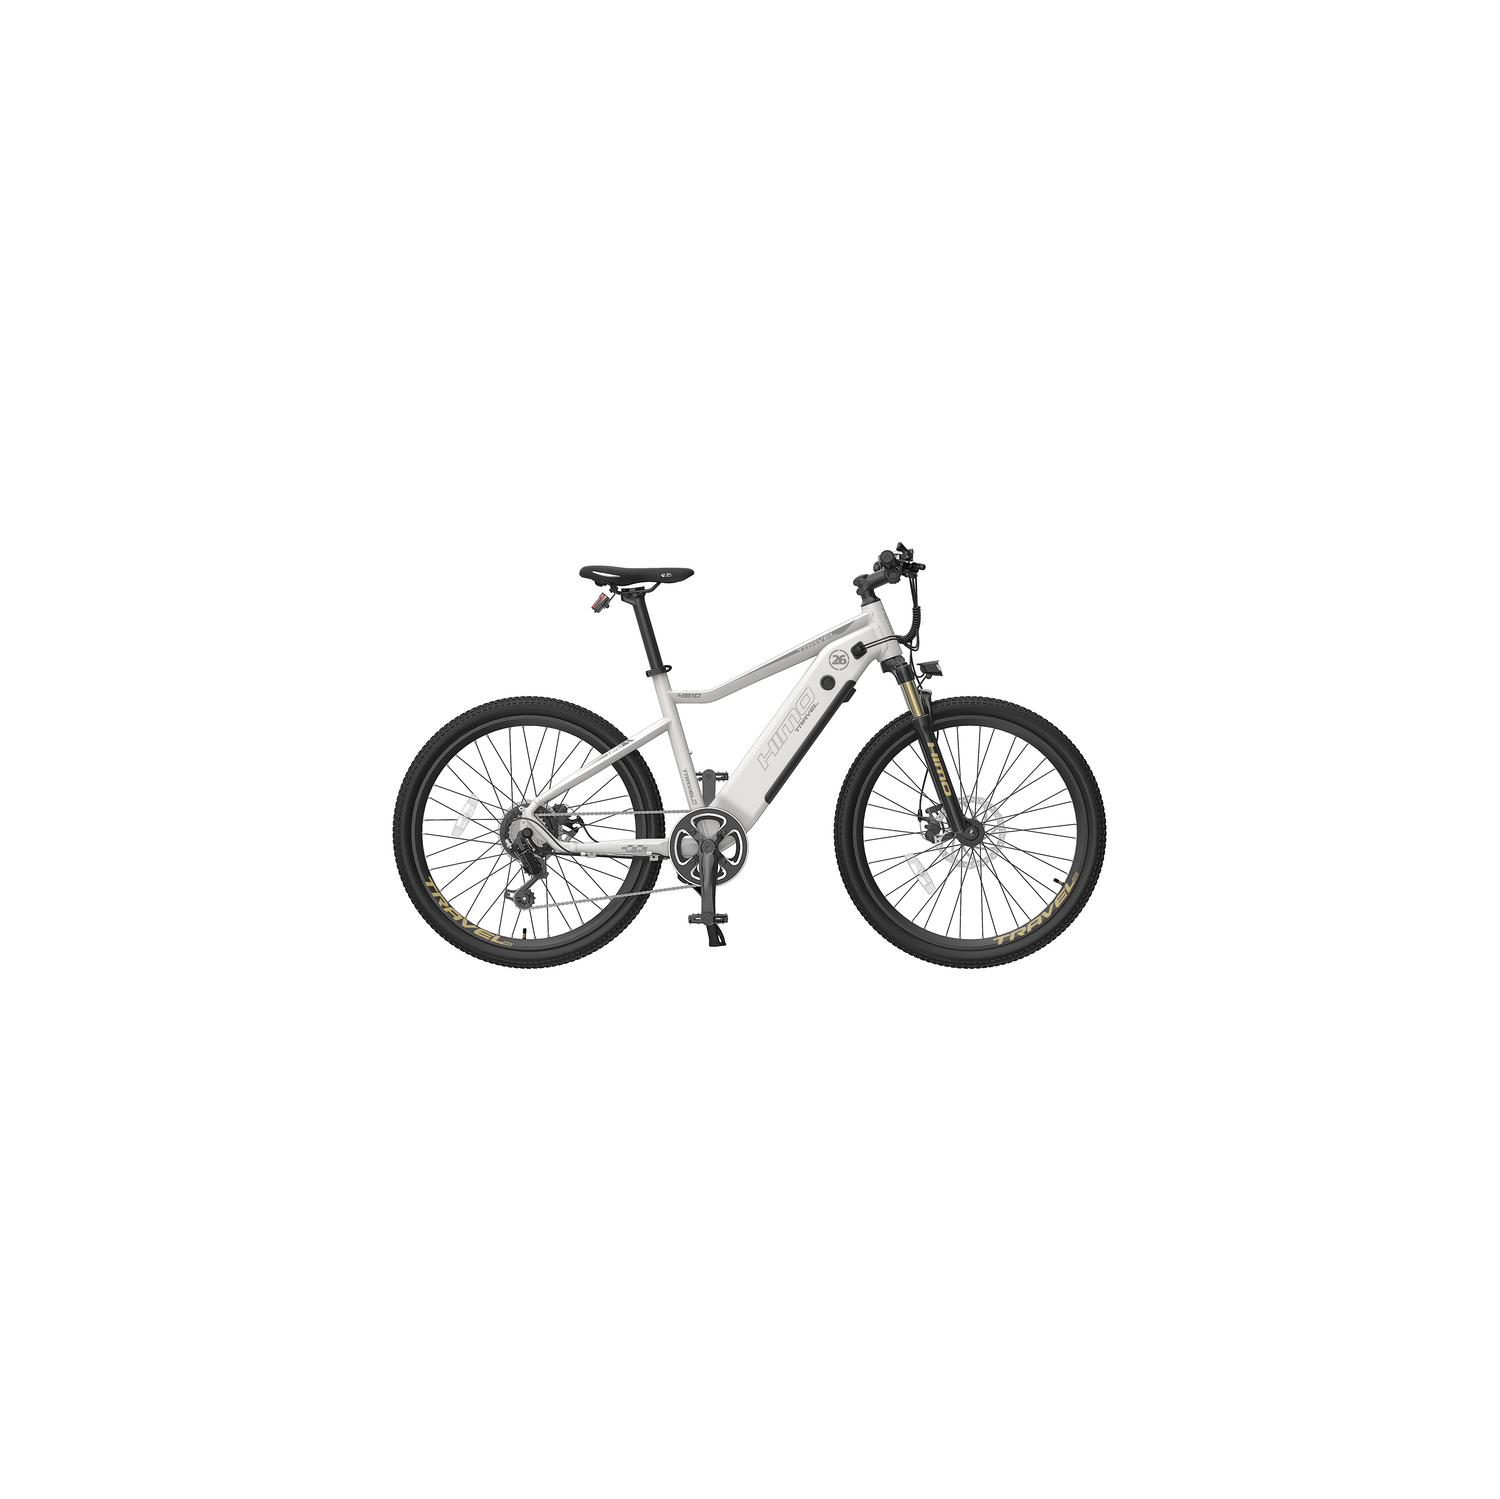 HIMO C26 Electric Bike White. Max Battery Range up to 100 KM, 48V 10Ah Removable Battery, Shimano 7-Speed, 0-7 level pedal assist, Large Multifunction LCD Display